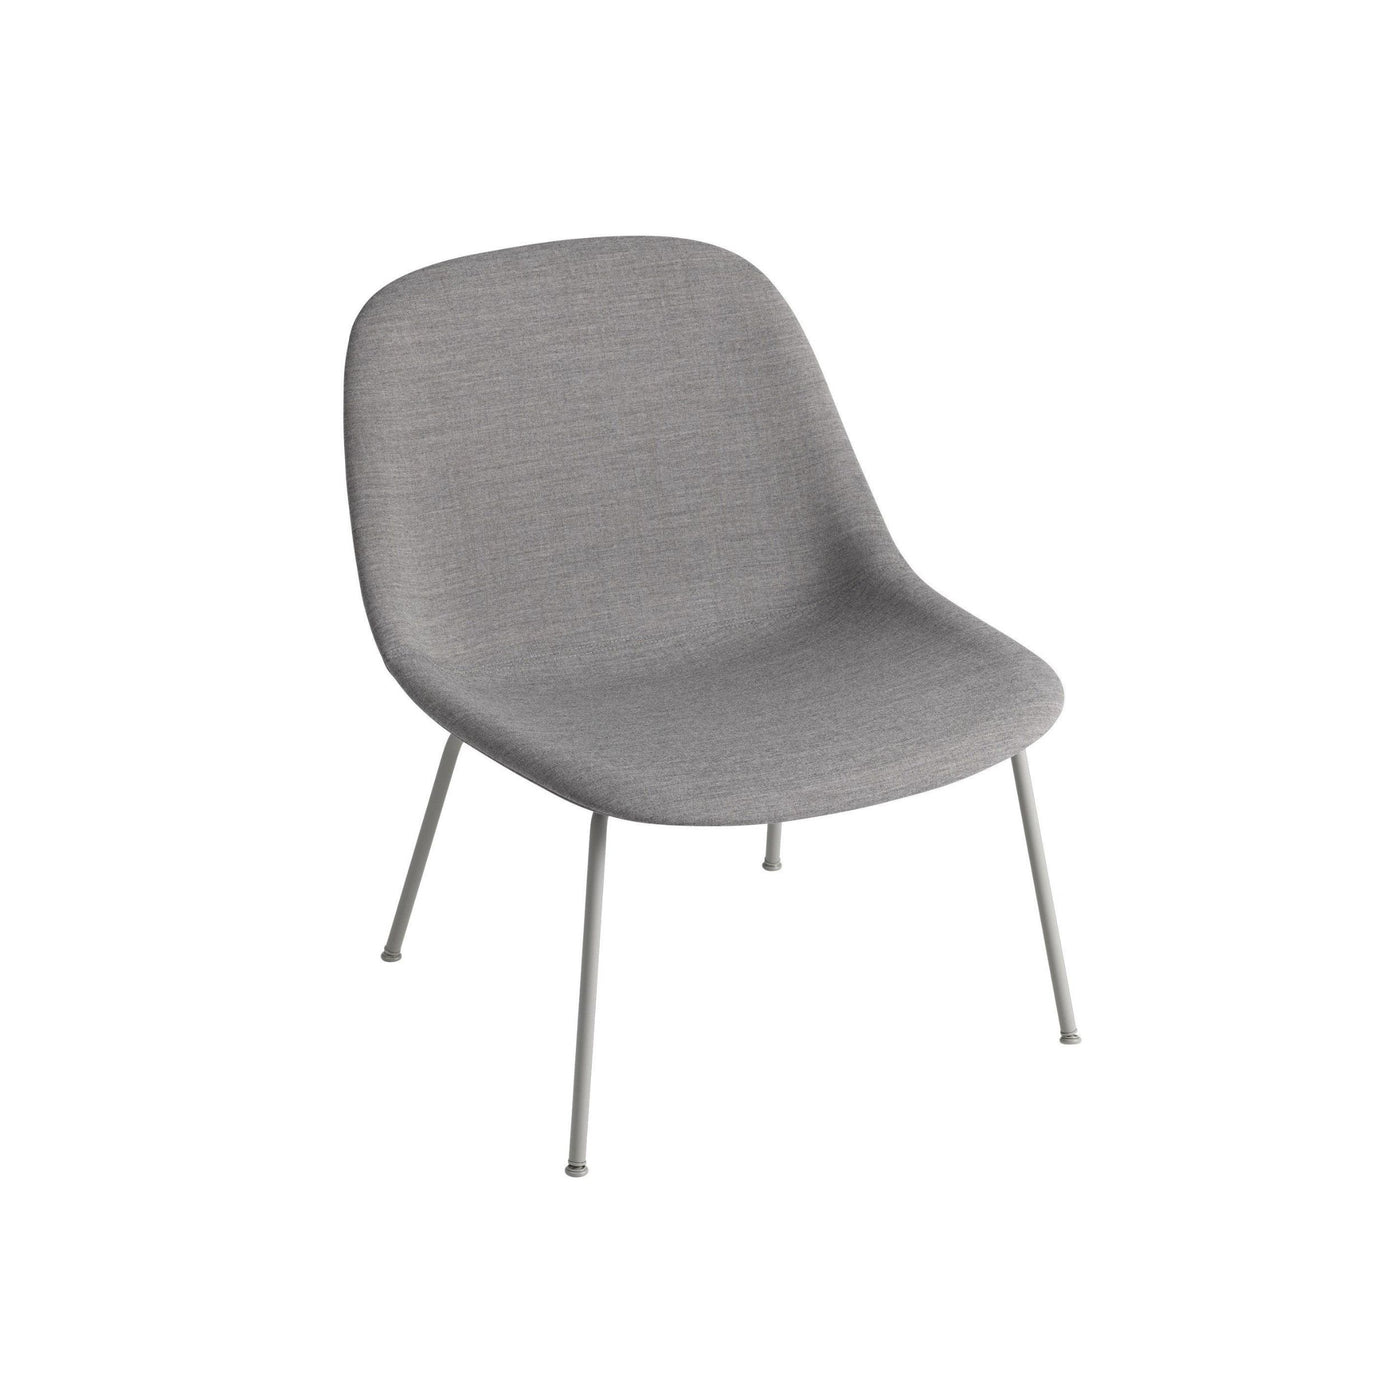 muuto fiber lounge chair remix 133 grey base available from someday designs. #colour_remix-133